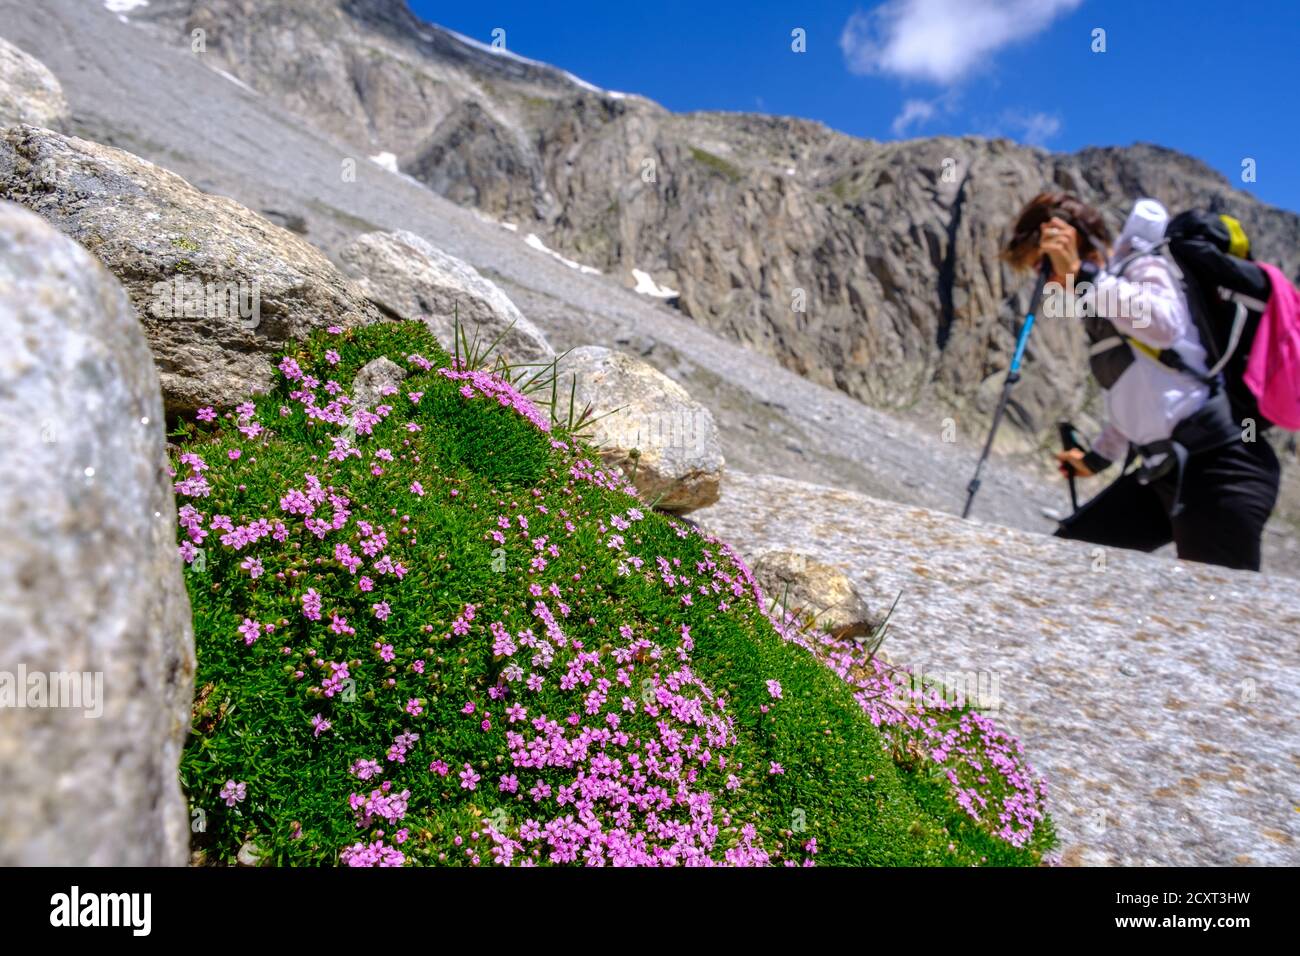 A girl ascending a mountain. Rock and flowers Stock Photo